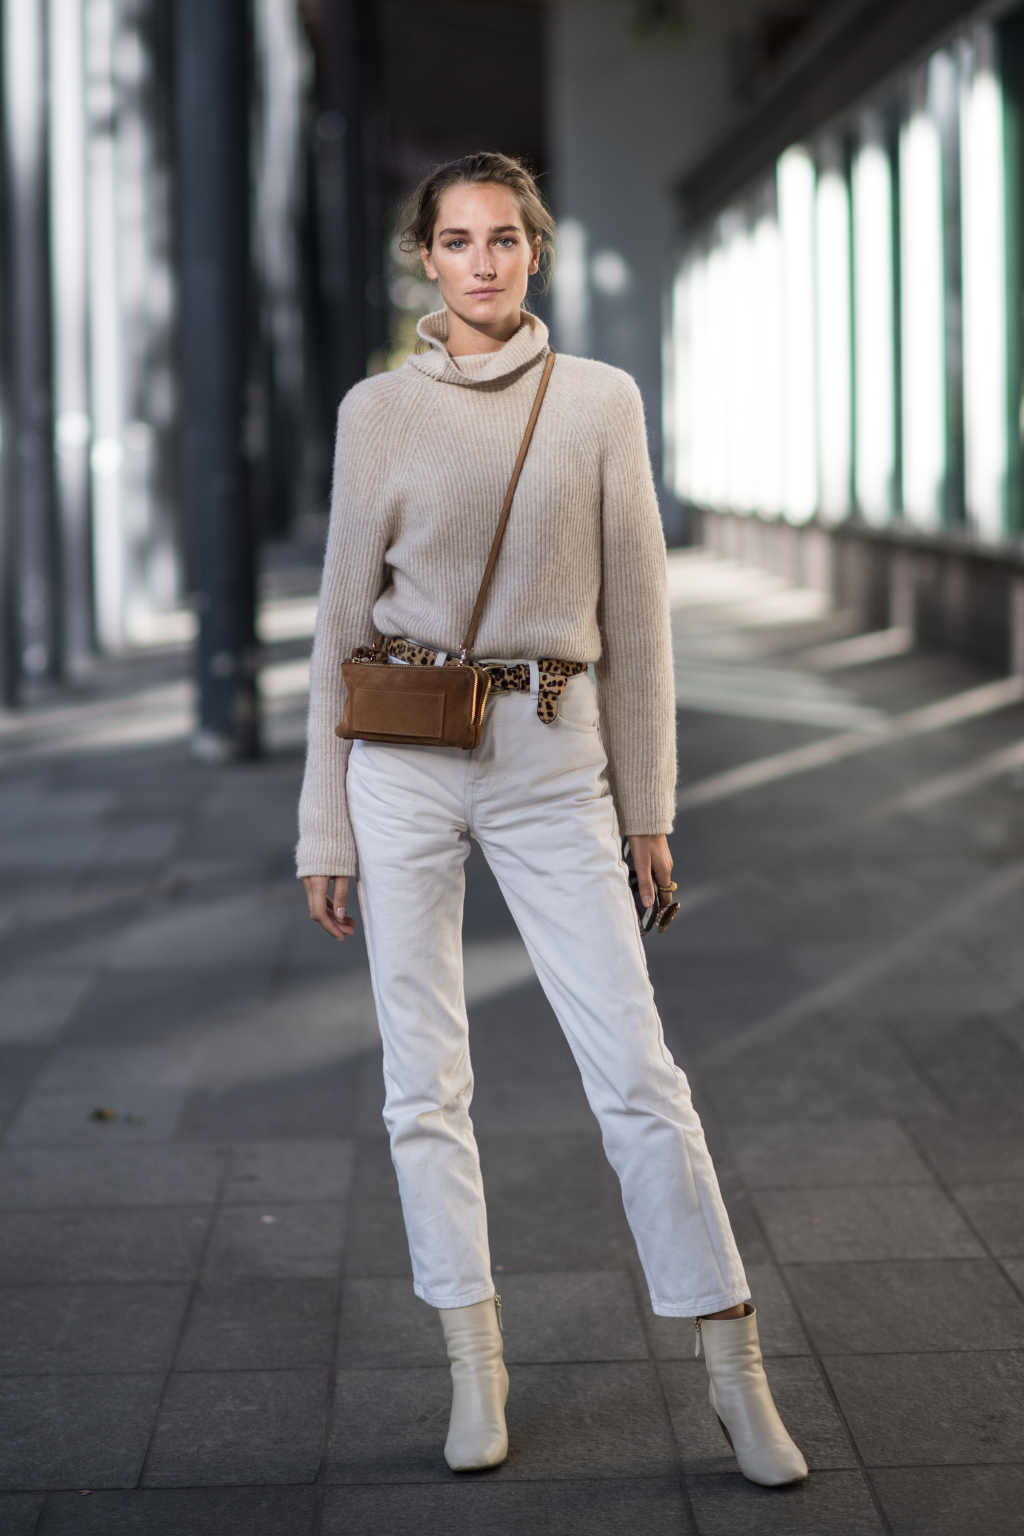 Sophisticated Minimalist Outfits For Early Fall - ALL FOR FASHION DESIGN